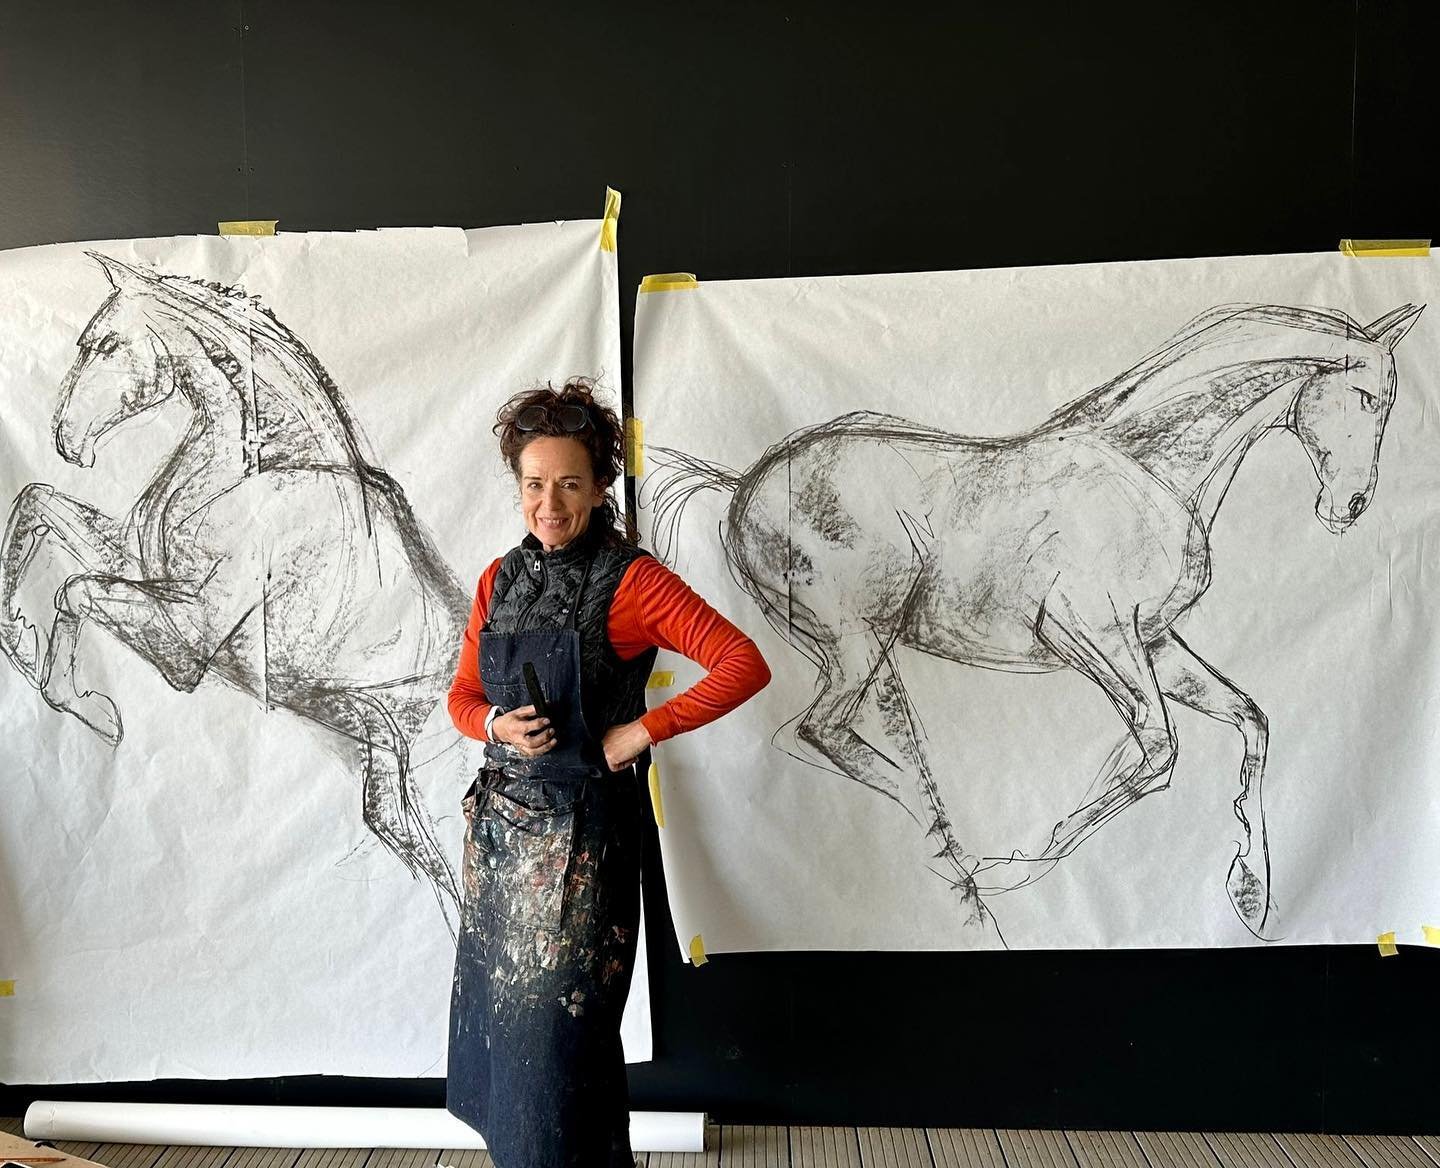 I had a fantastic time yesterday doing some live drawing and talking about my process at @rwbviewgallery .

Thank you so much to all of you who came by to see me and the &ldquo;Equine&rdquo; exhibition and for donating to @greatwoodcharity  for some 